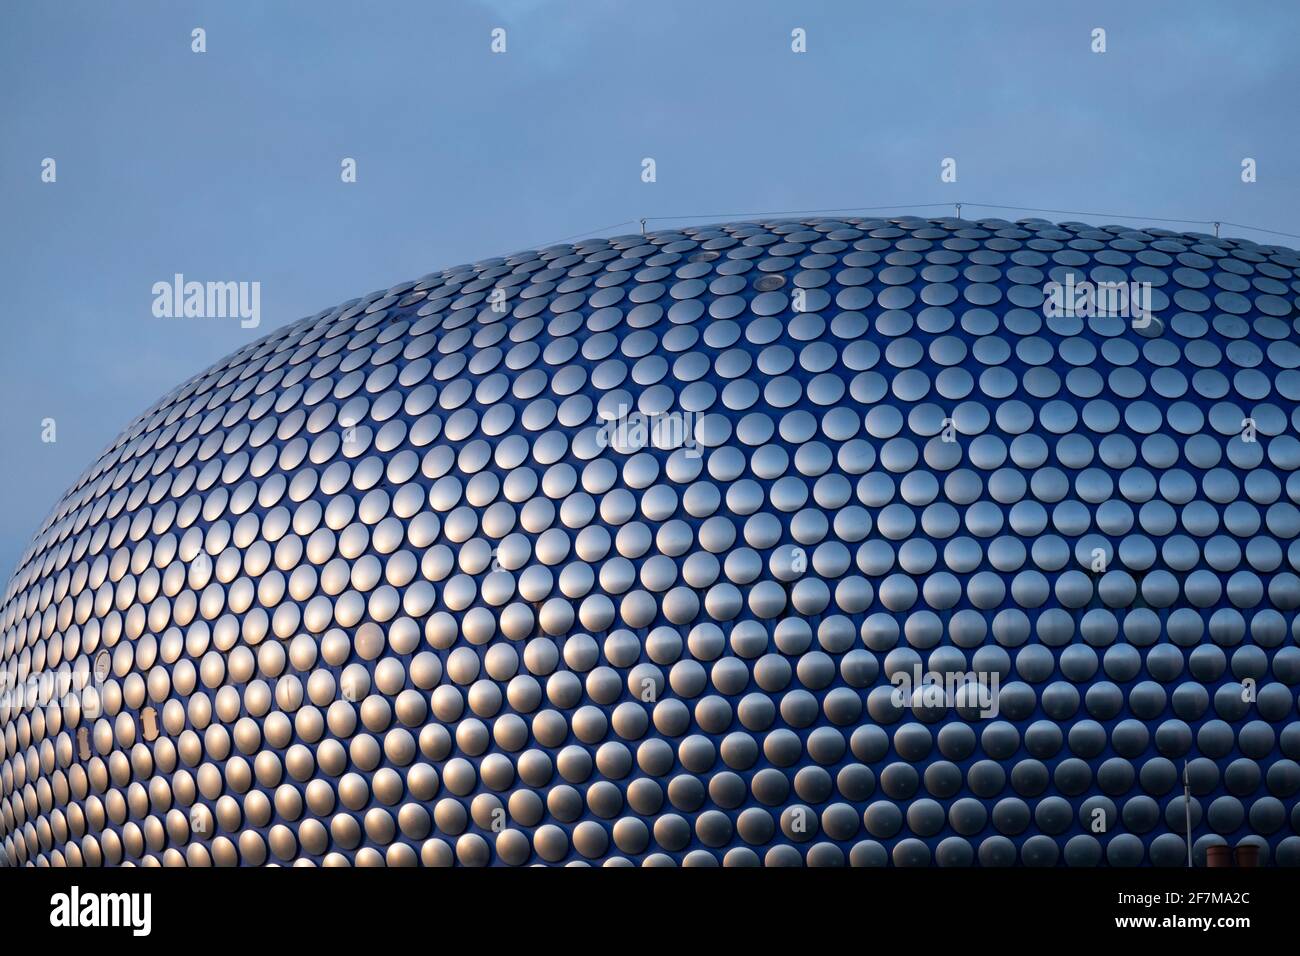 Modern landmark architecture of the Selfridges Building on 7th January 2021 in Birmingham, United Kingdom. The building is part of the Bullring Shopping Centre and houses Selfridges Department Store. The building was completed in 2003 at a cost of £60 million and designed by architecture firm Future Systems. It has a steel framework with sprayed concrete facade. Since its construction, the building has become an iconic architectural landmark and seen as a major contribution to the regeneration of Birmingham. Stock Photo